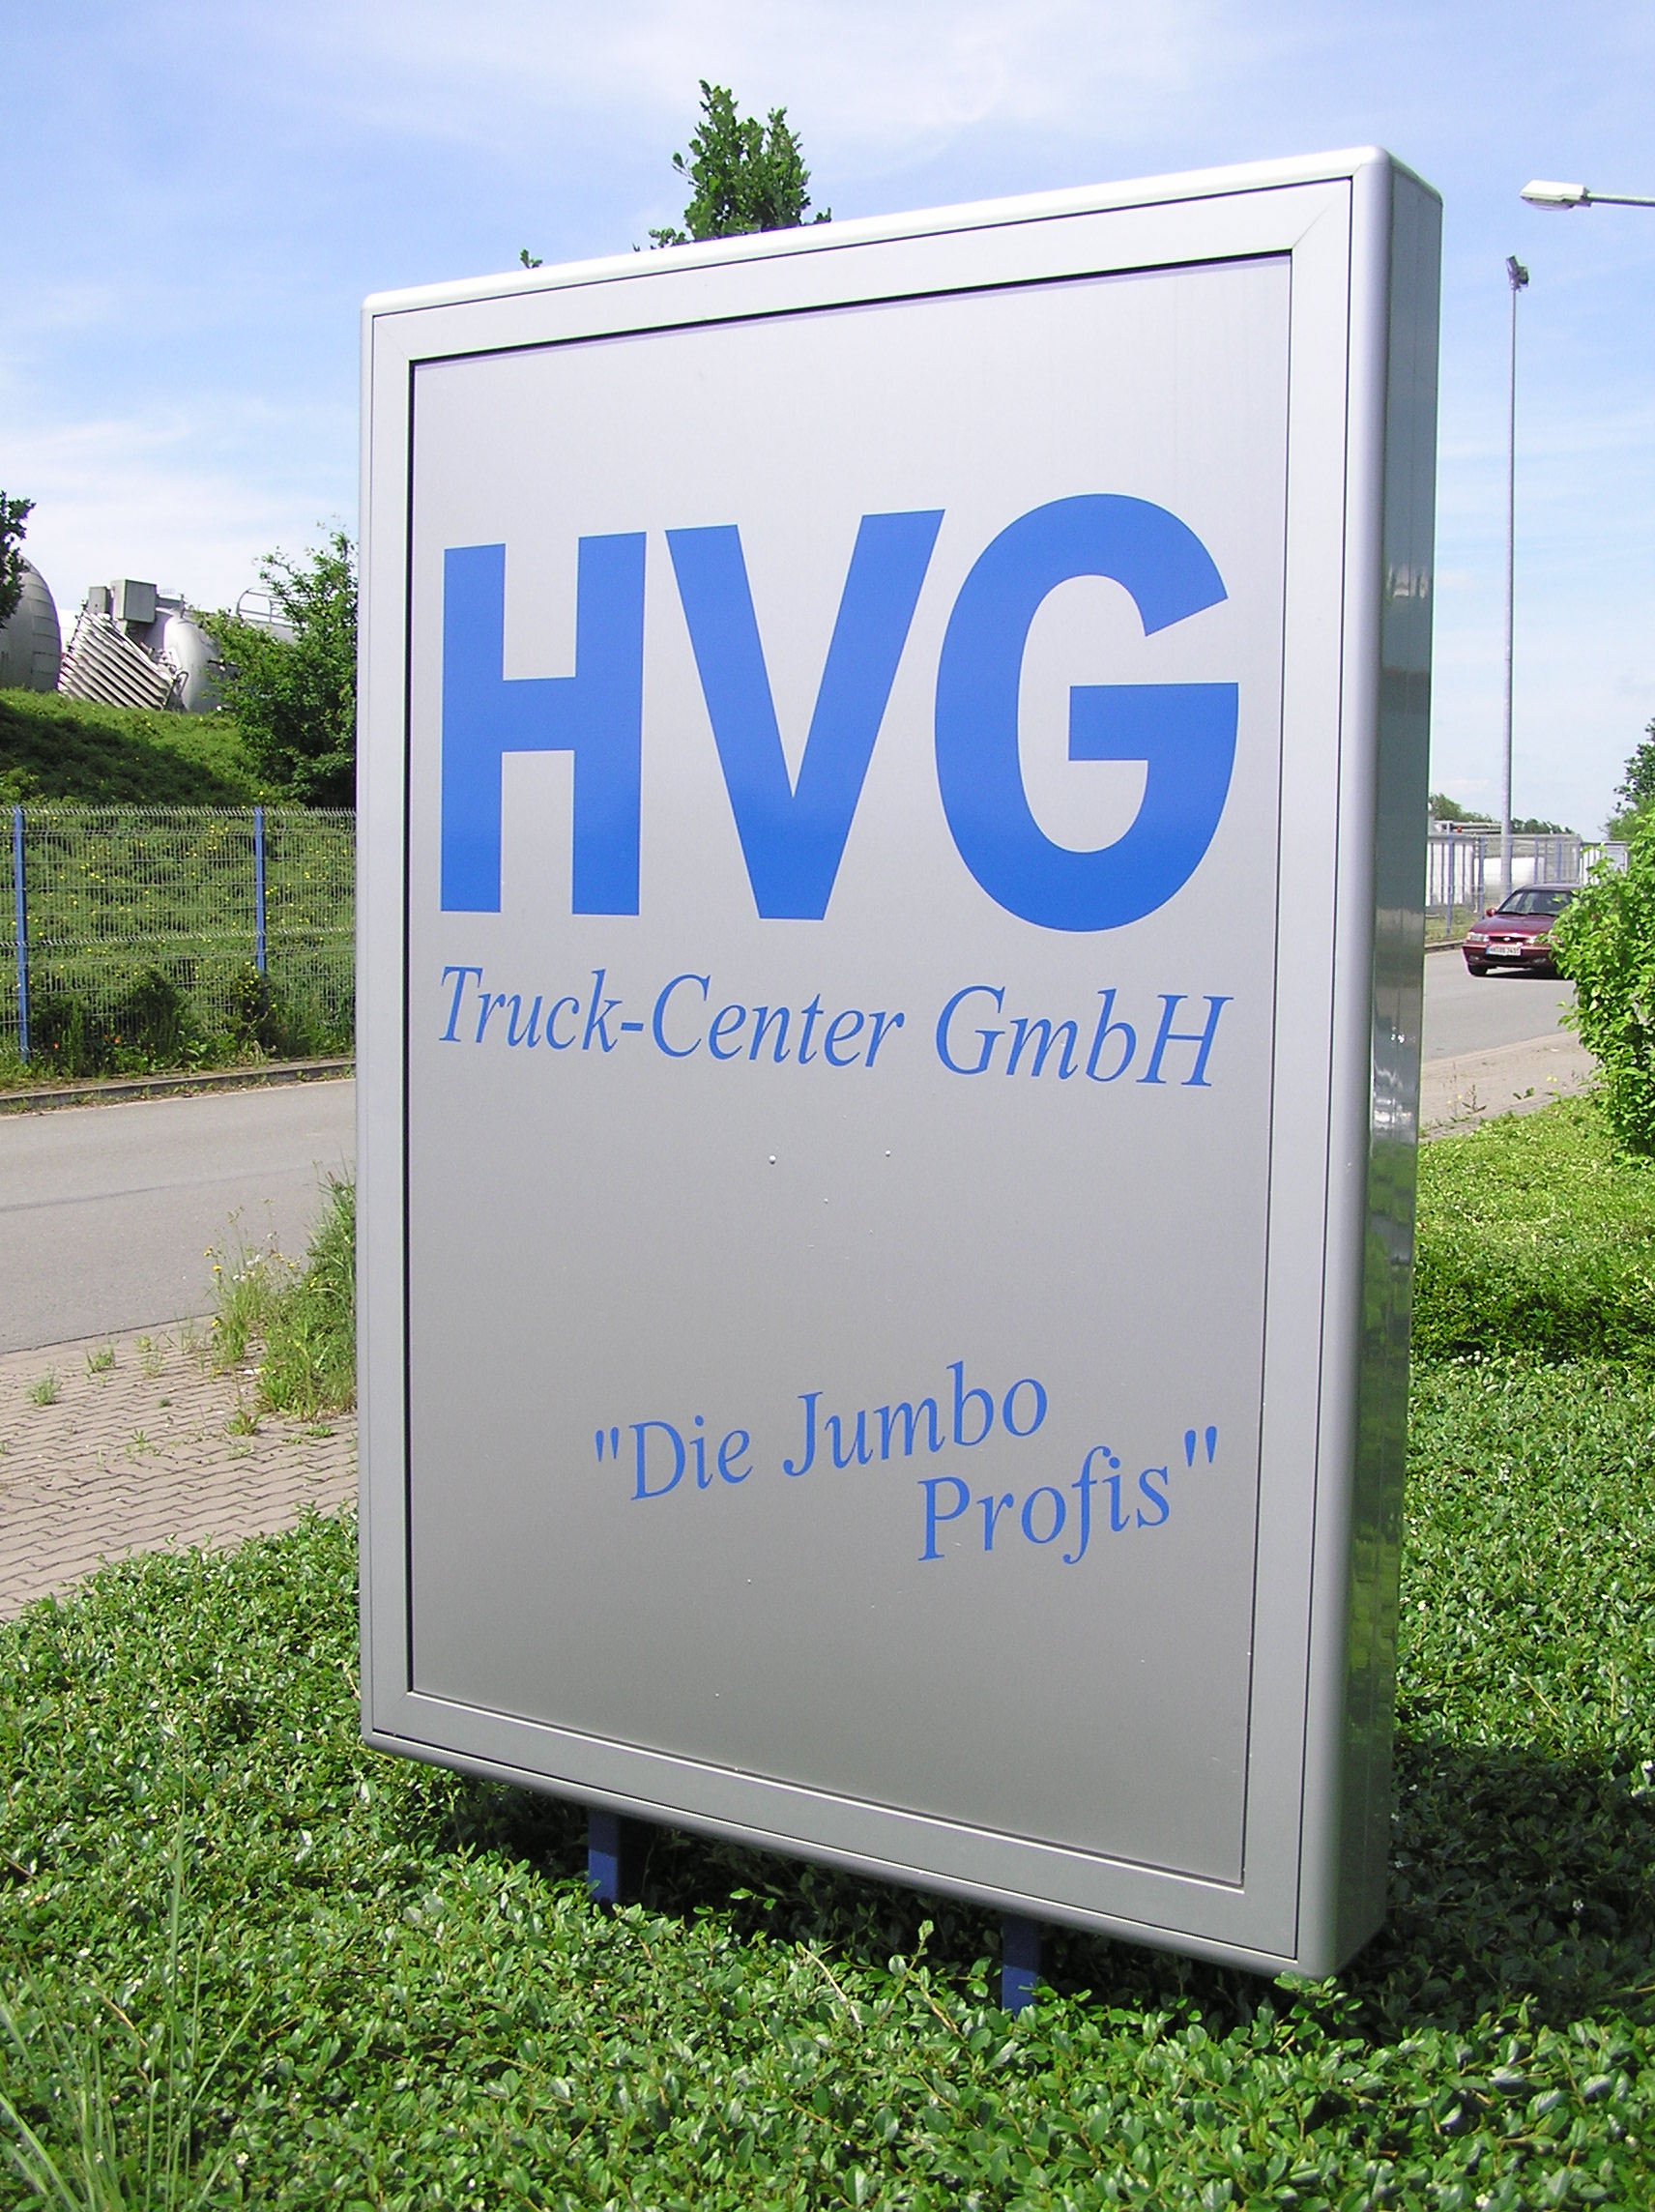 HVG Truck-Center GmbH undefined: фото 1